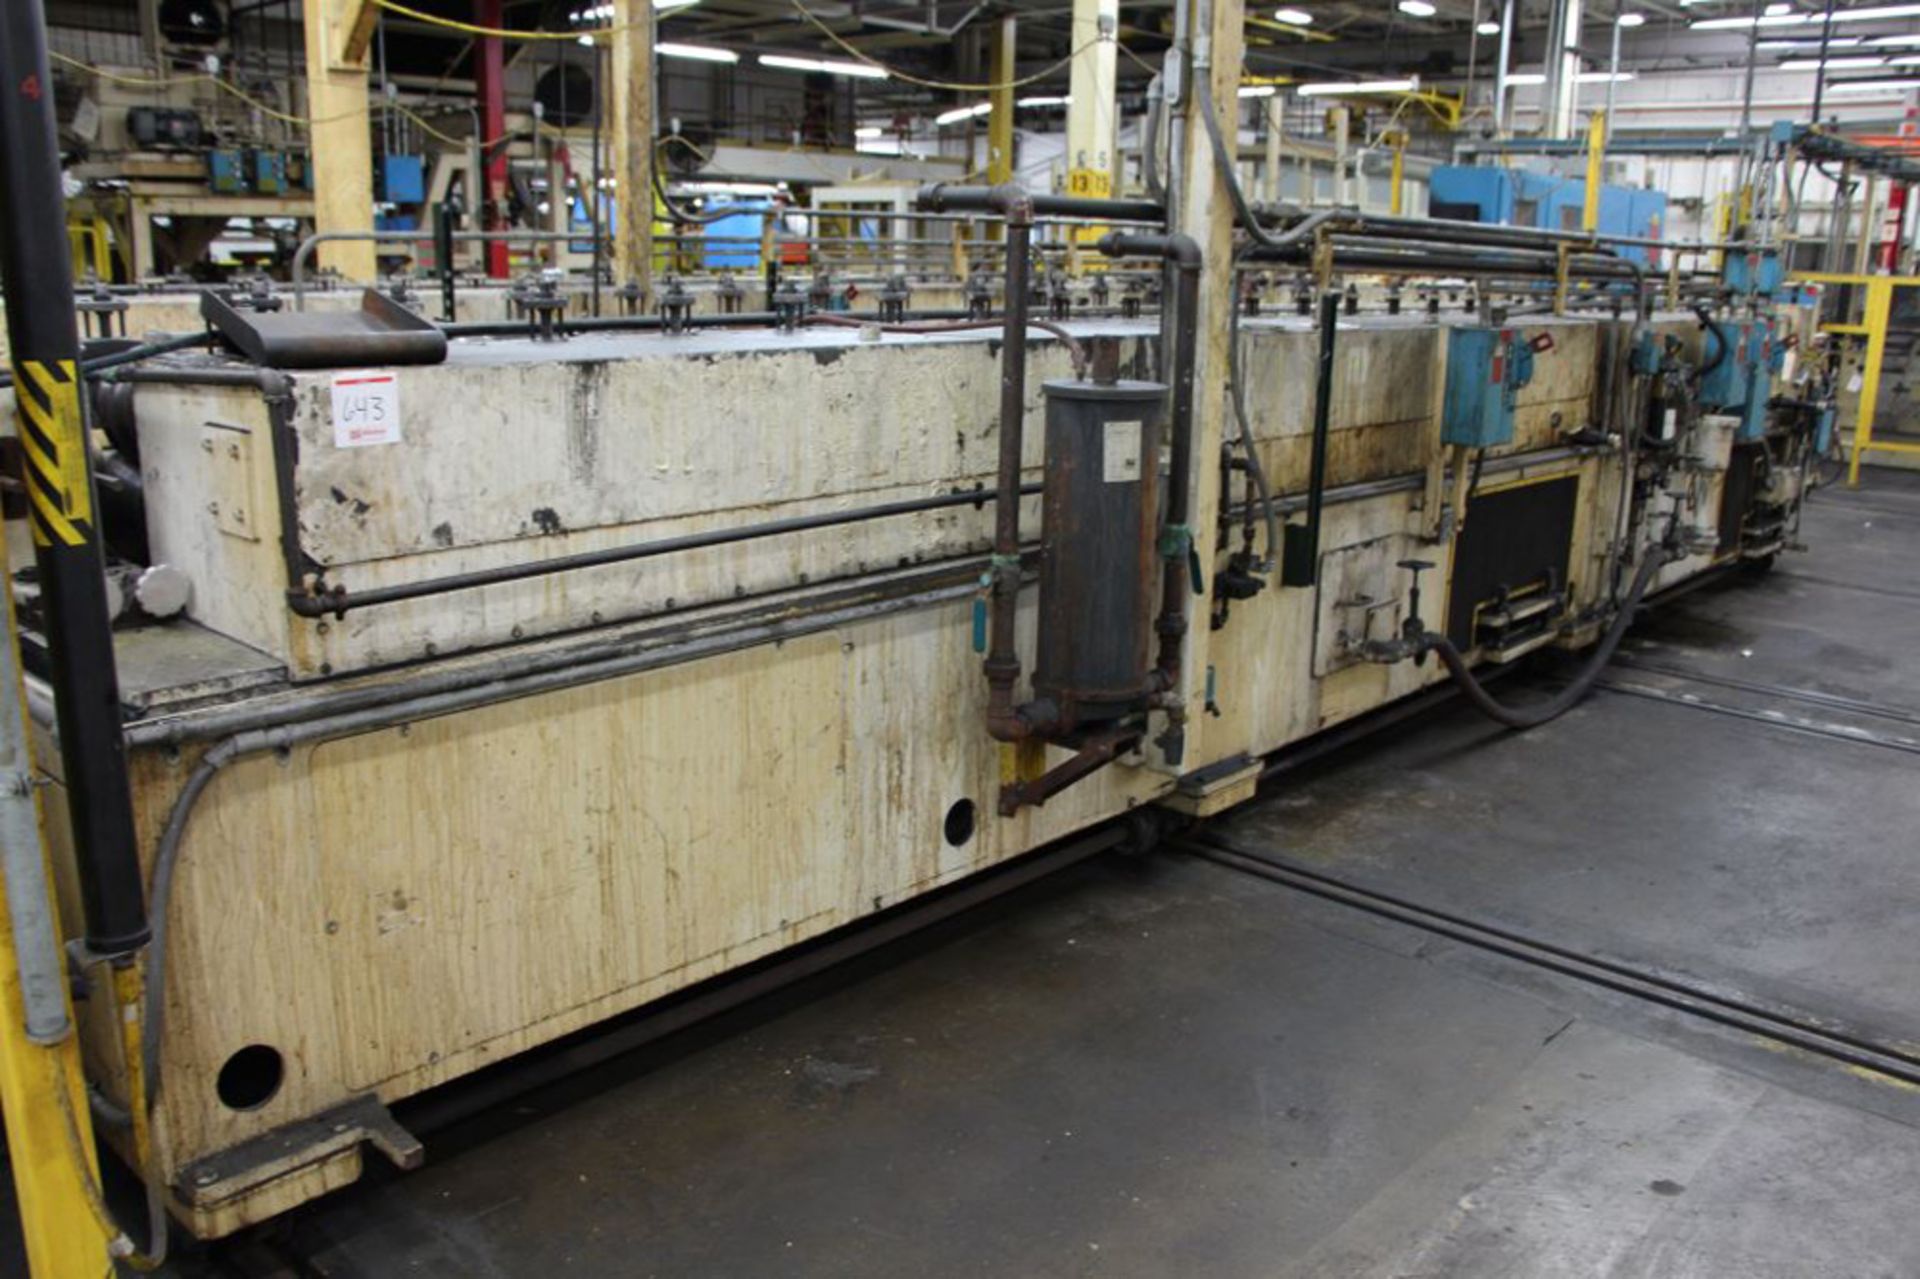 2000 Tishken Geared Rollformer, 24 Stand x 18" RS x 2" Shaft, Mdl: 24-MW-2, S/N: 22368 - - Image 7 of 12